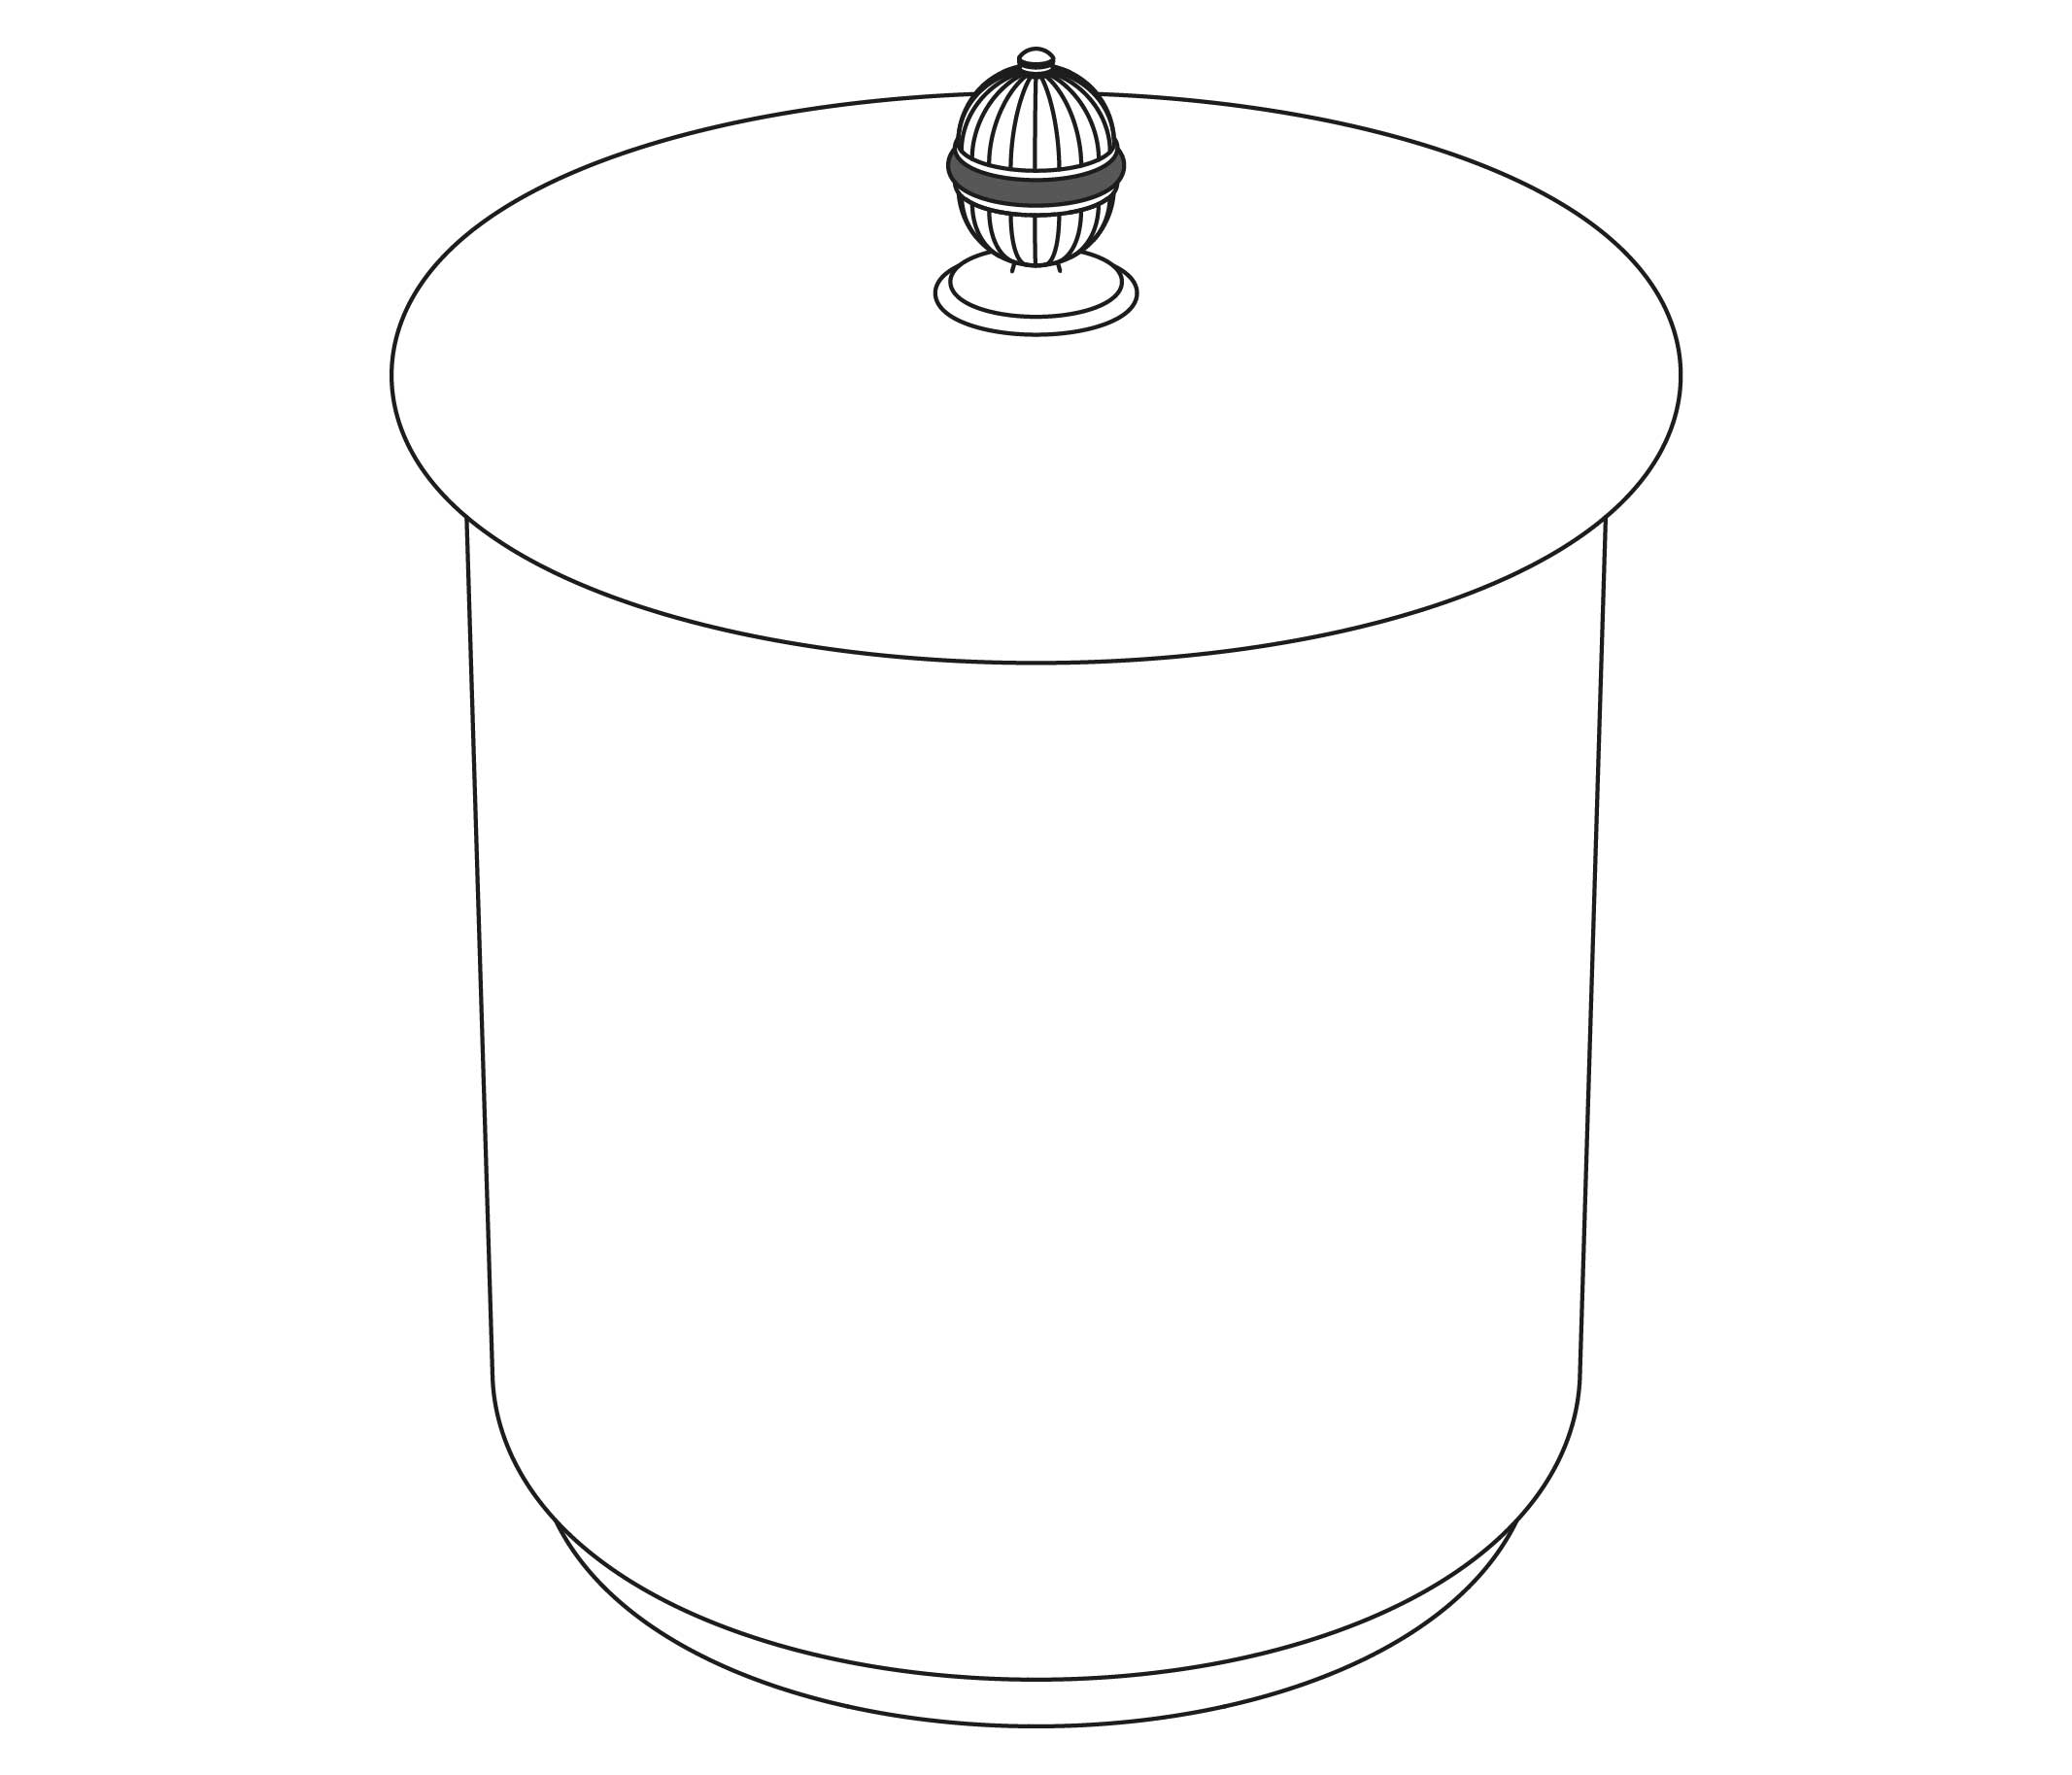 S182-577 Bin with cover